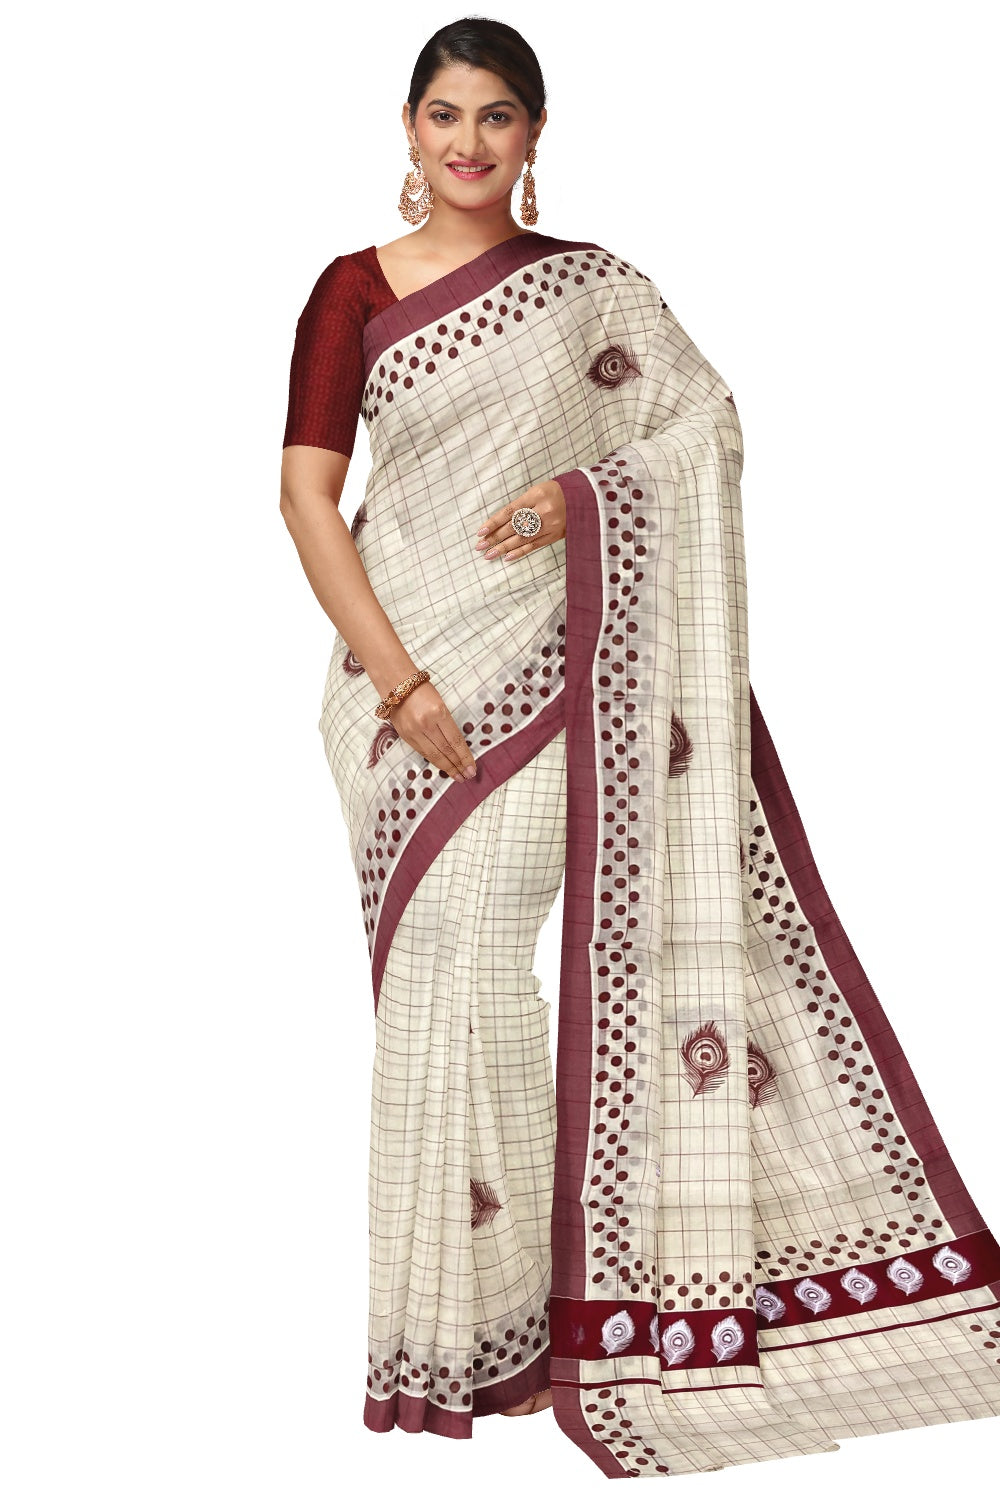 Pure Cotton Check Design Kerala Saree with Maroon Polka Dots and Feather Block Prints